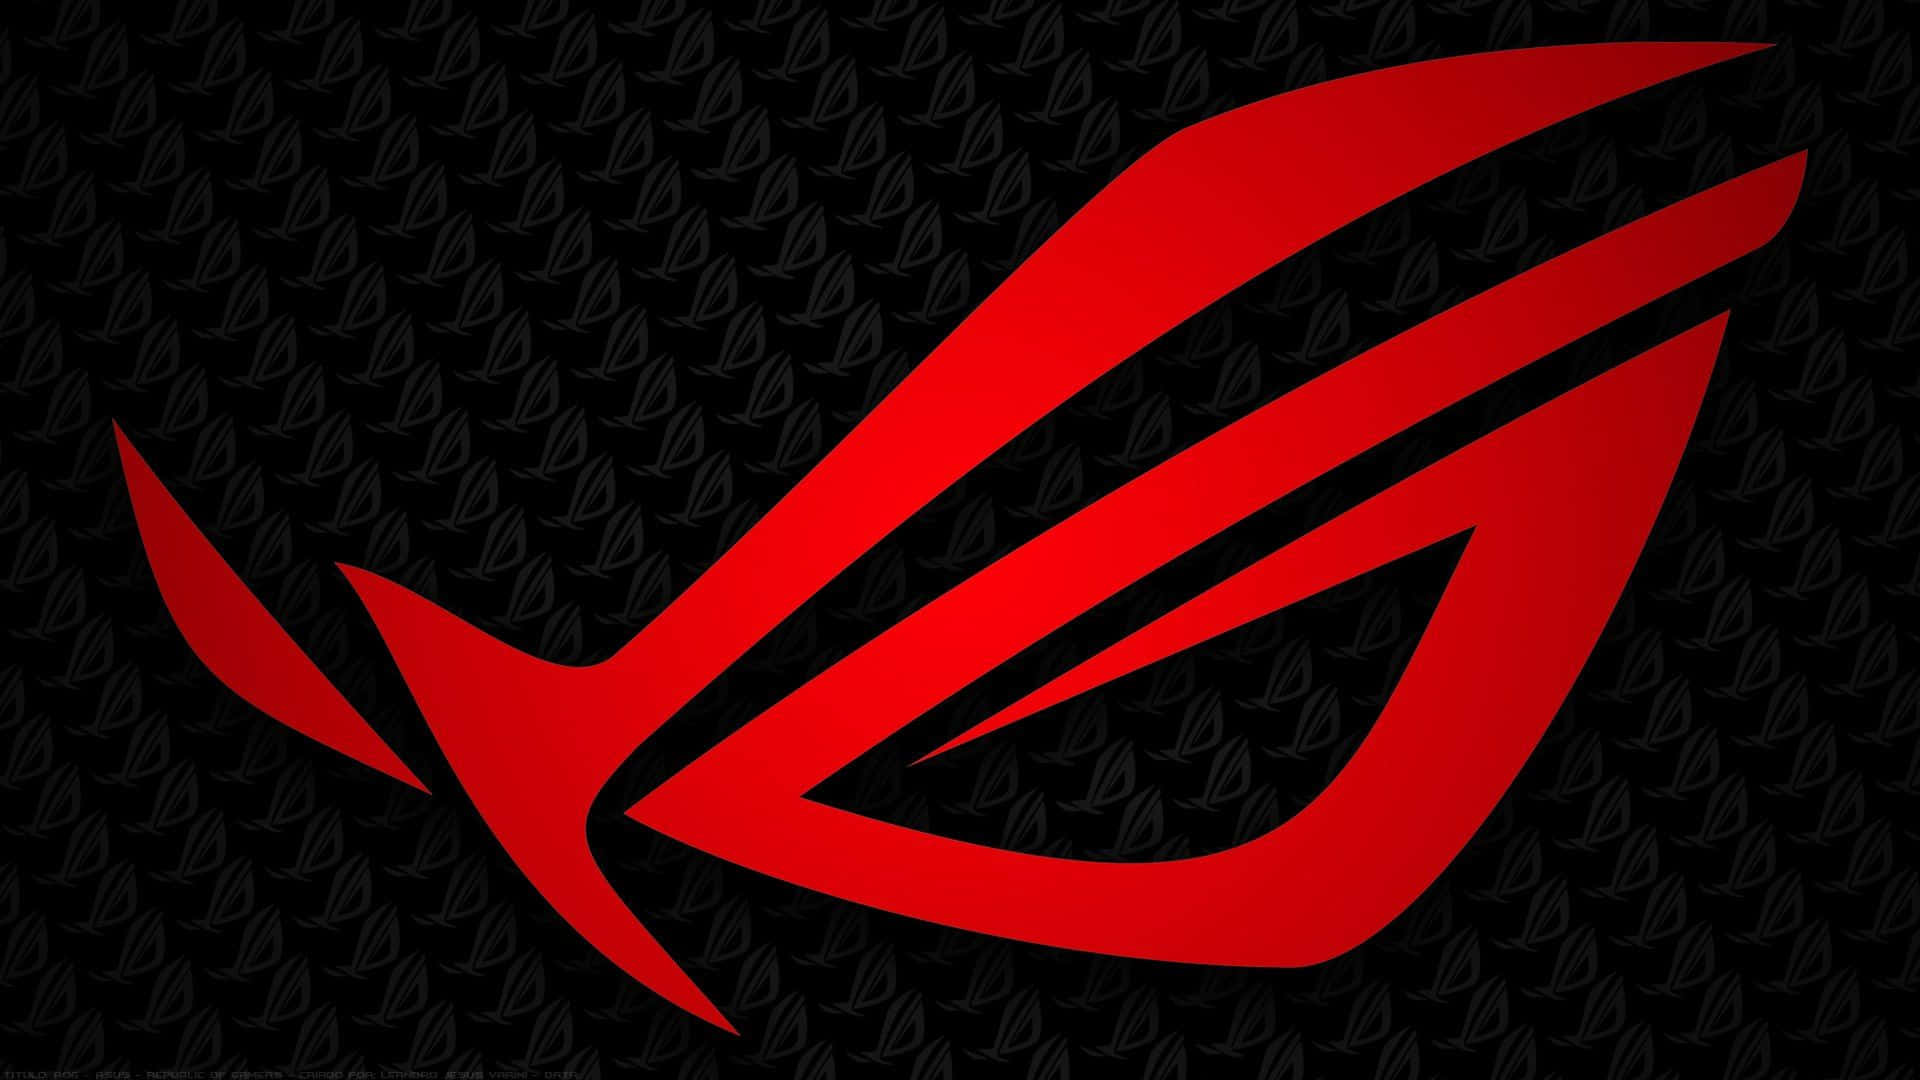 The New Asus ROG: All You Need for Gaming Excellence